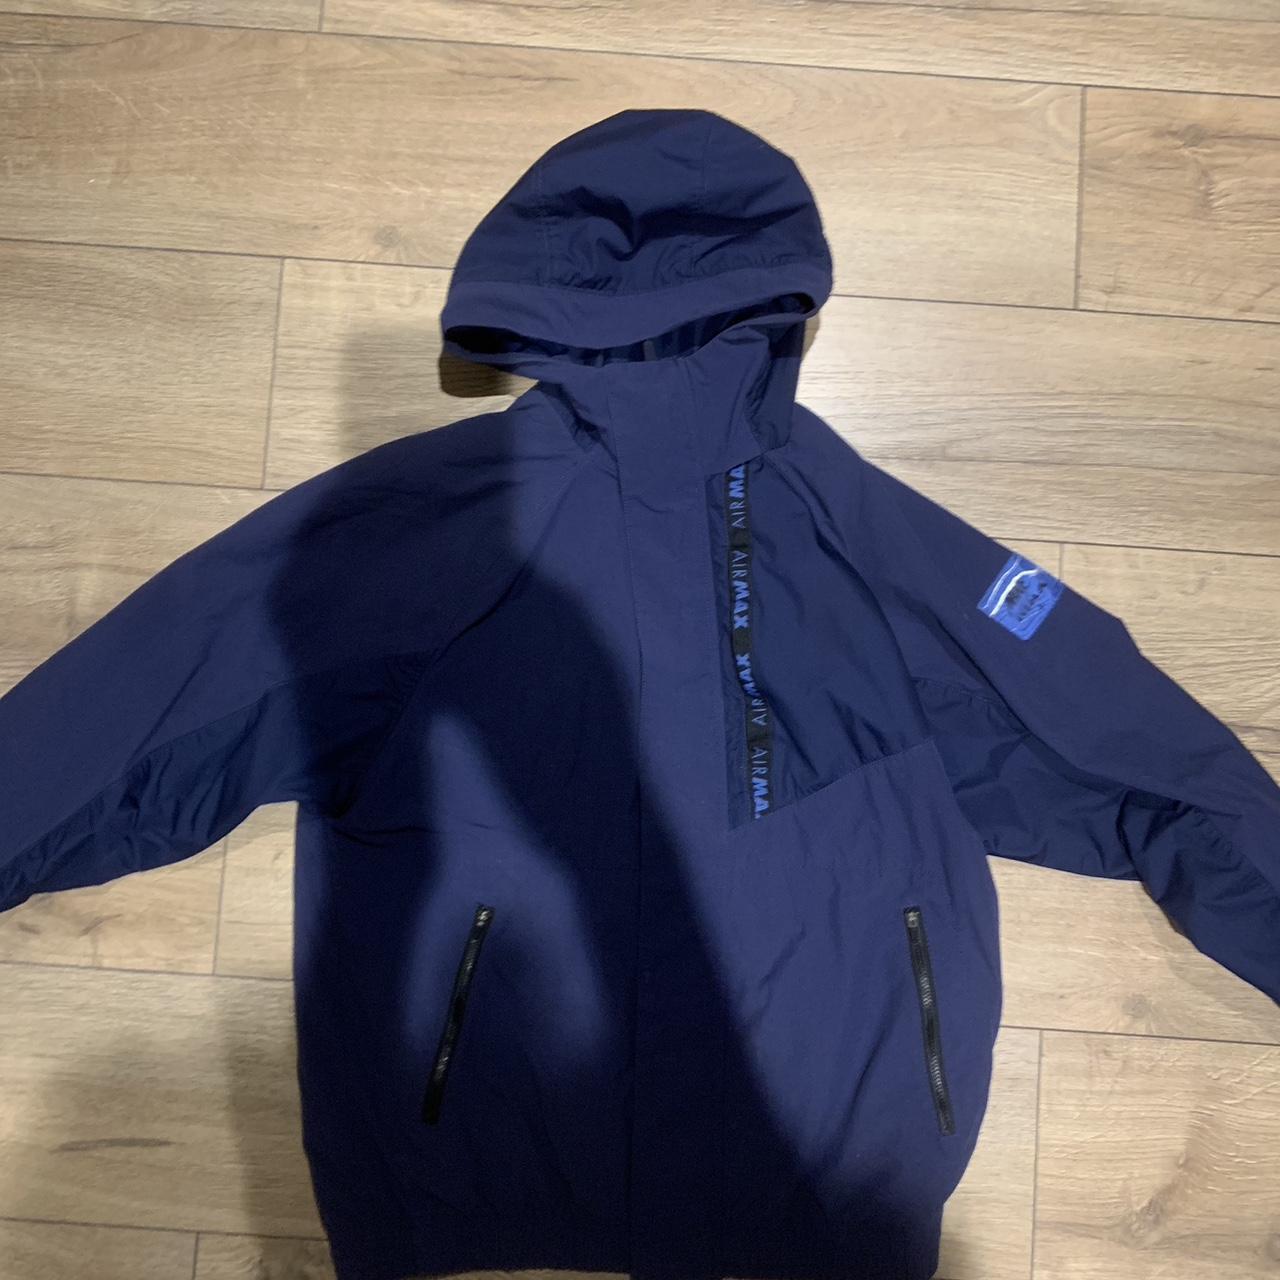 Woven Air Max Tracksuit - Depop